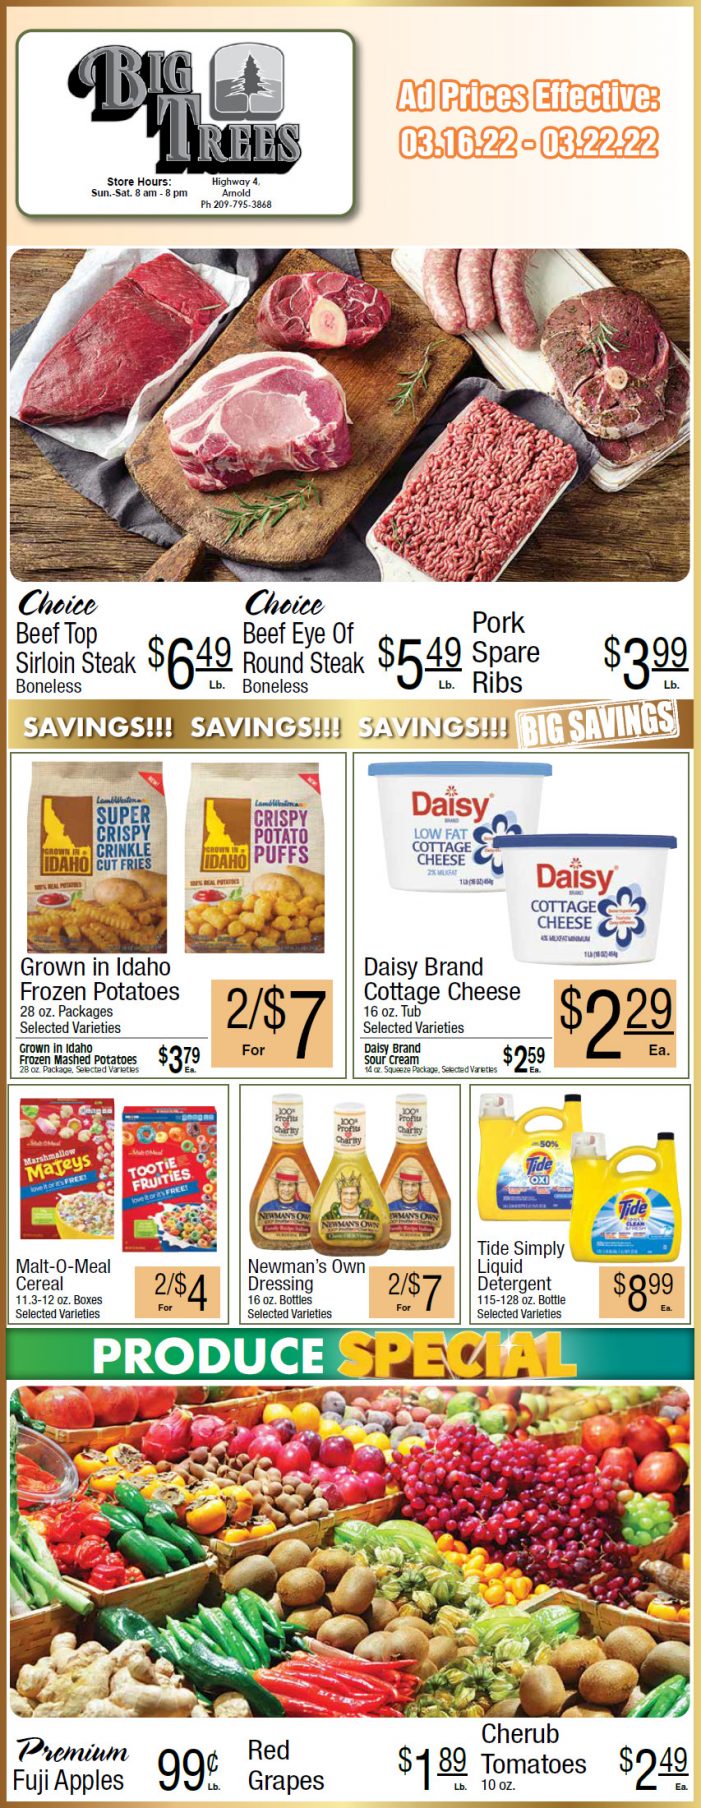 Big Trees Market Weekly Ad & Grocery Specials March 16th Through March 22nd! Shop Local & Save!